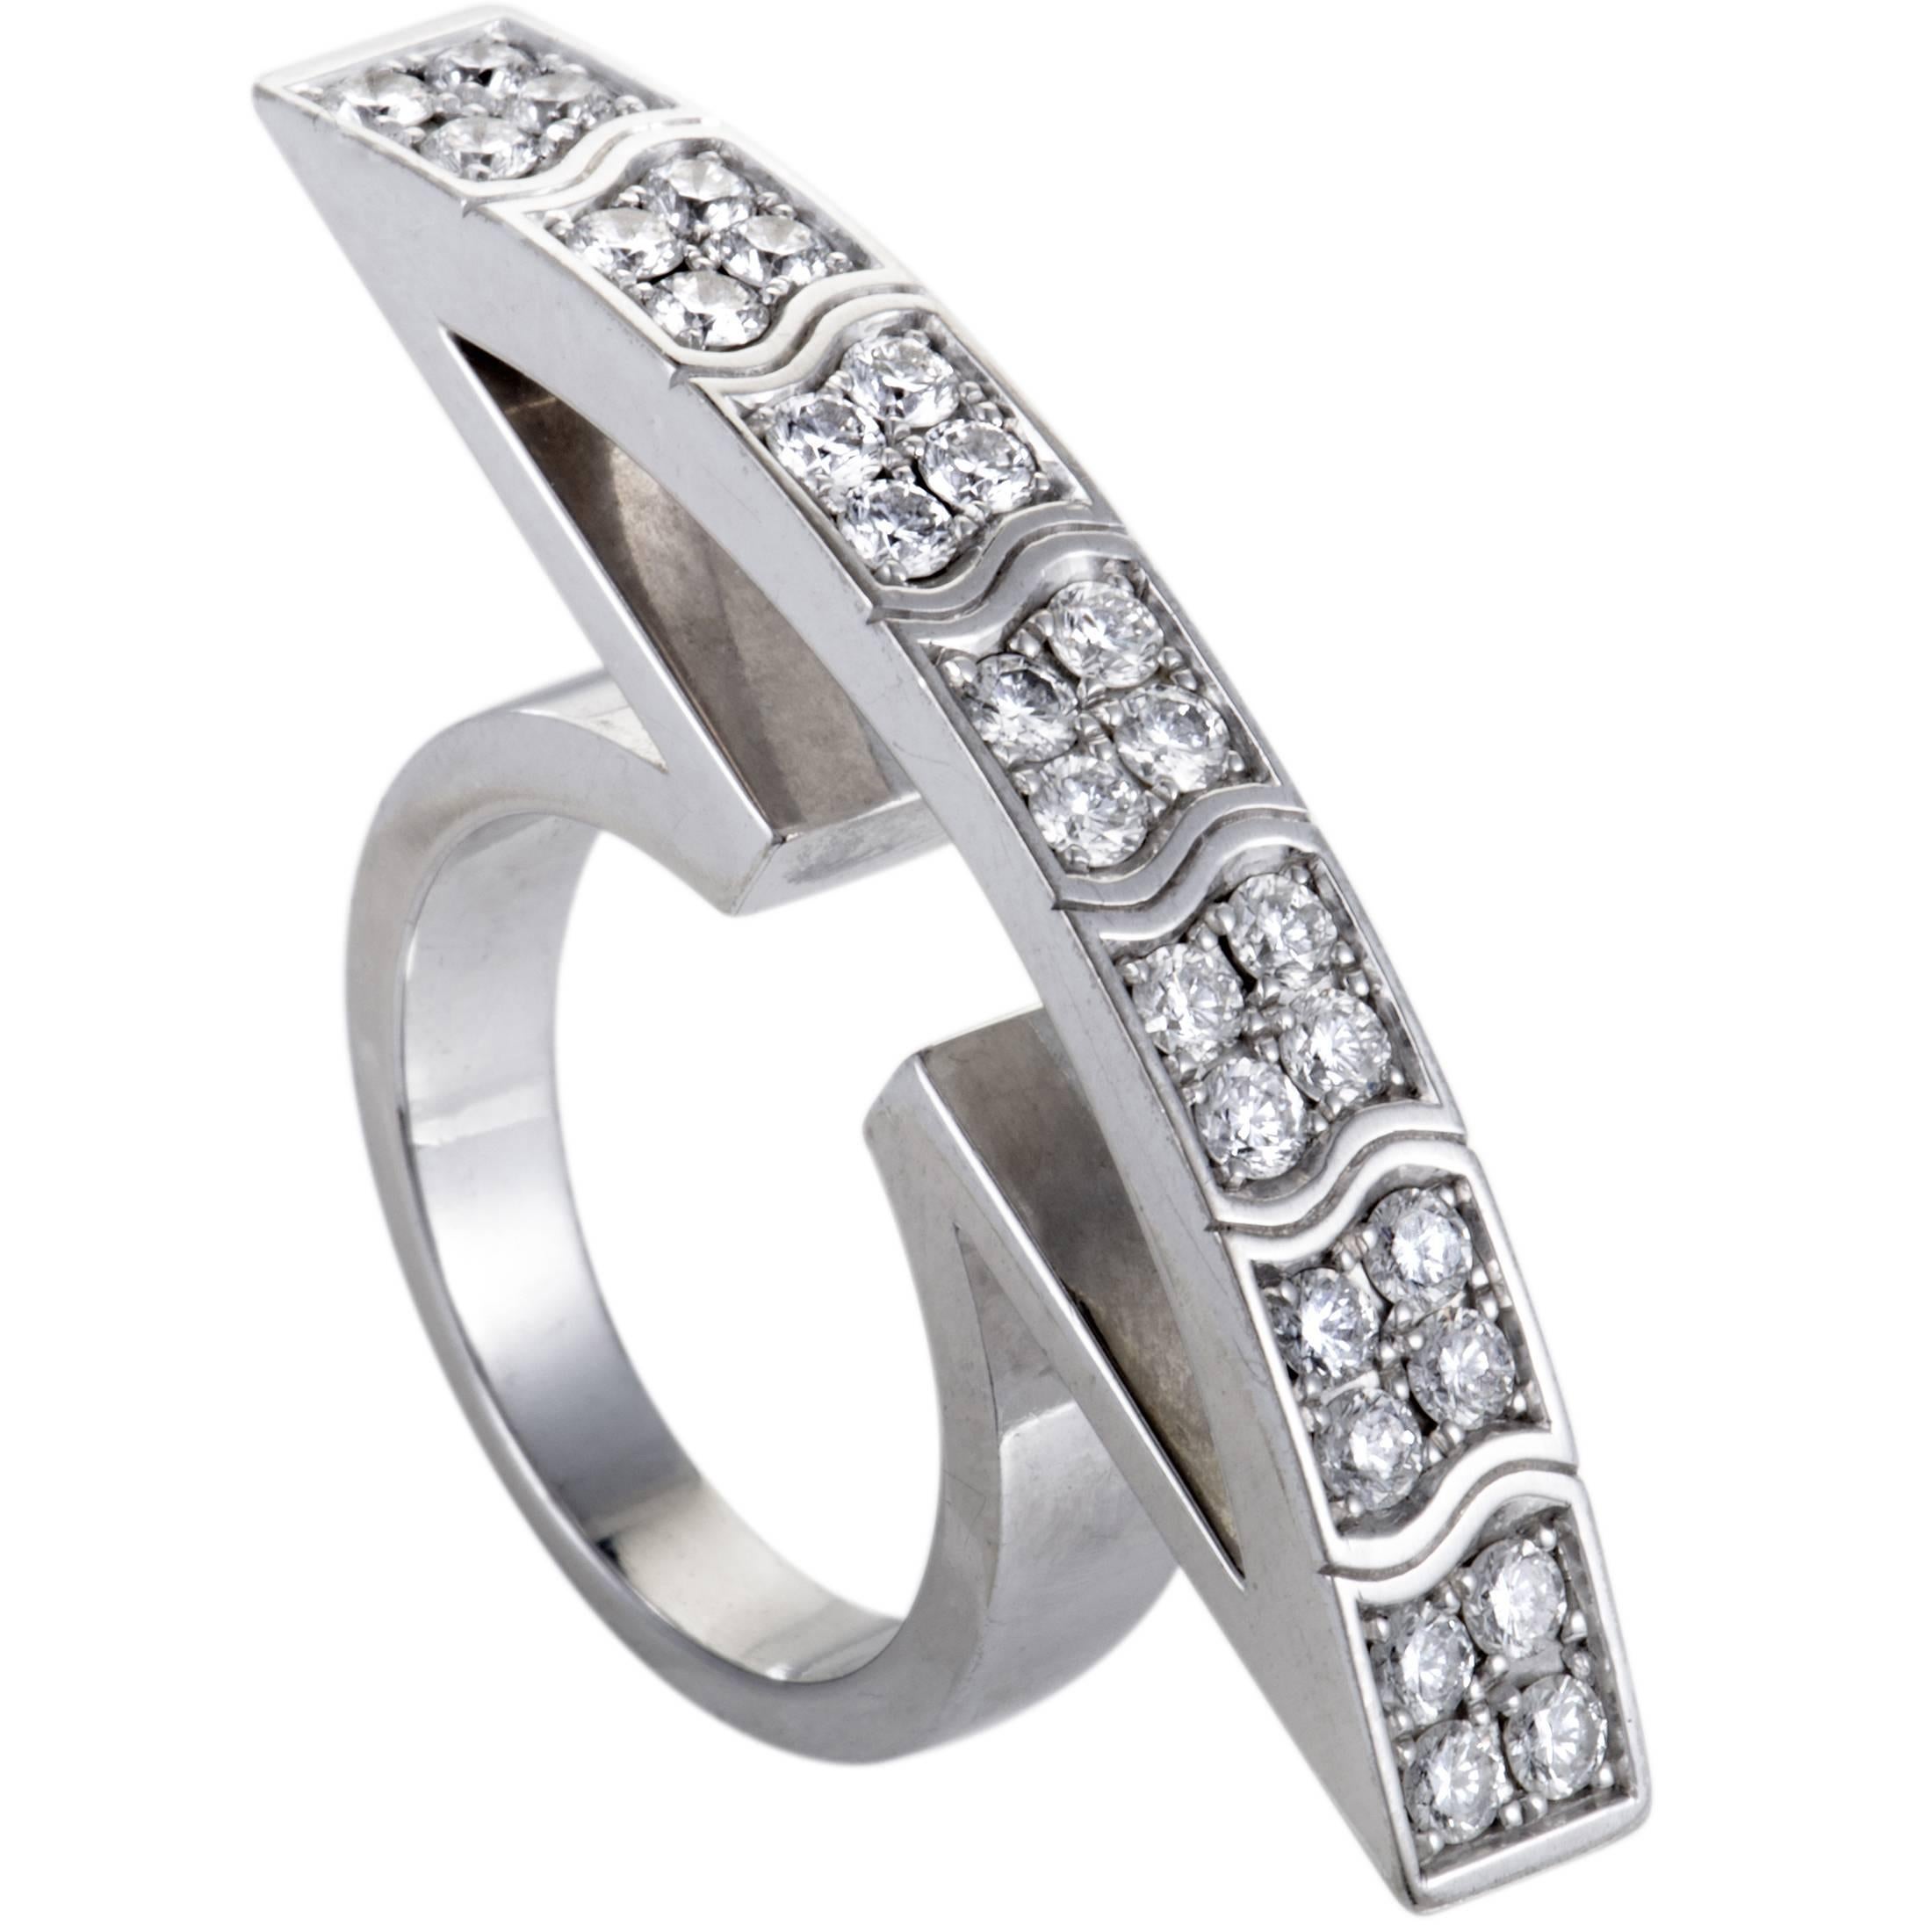 Piaget Diamond White Gold Curved Cocktail Ring